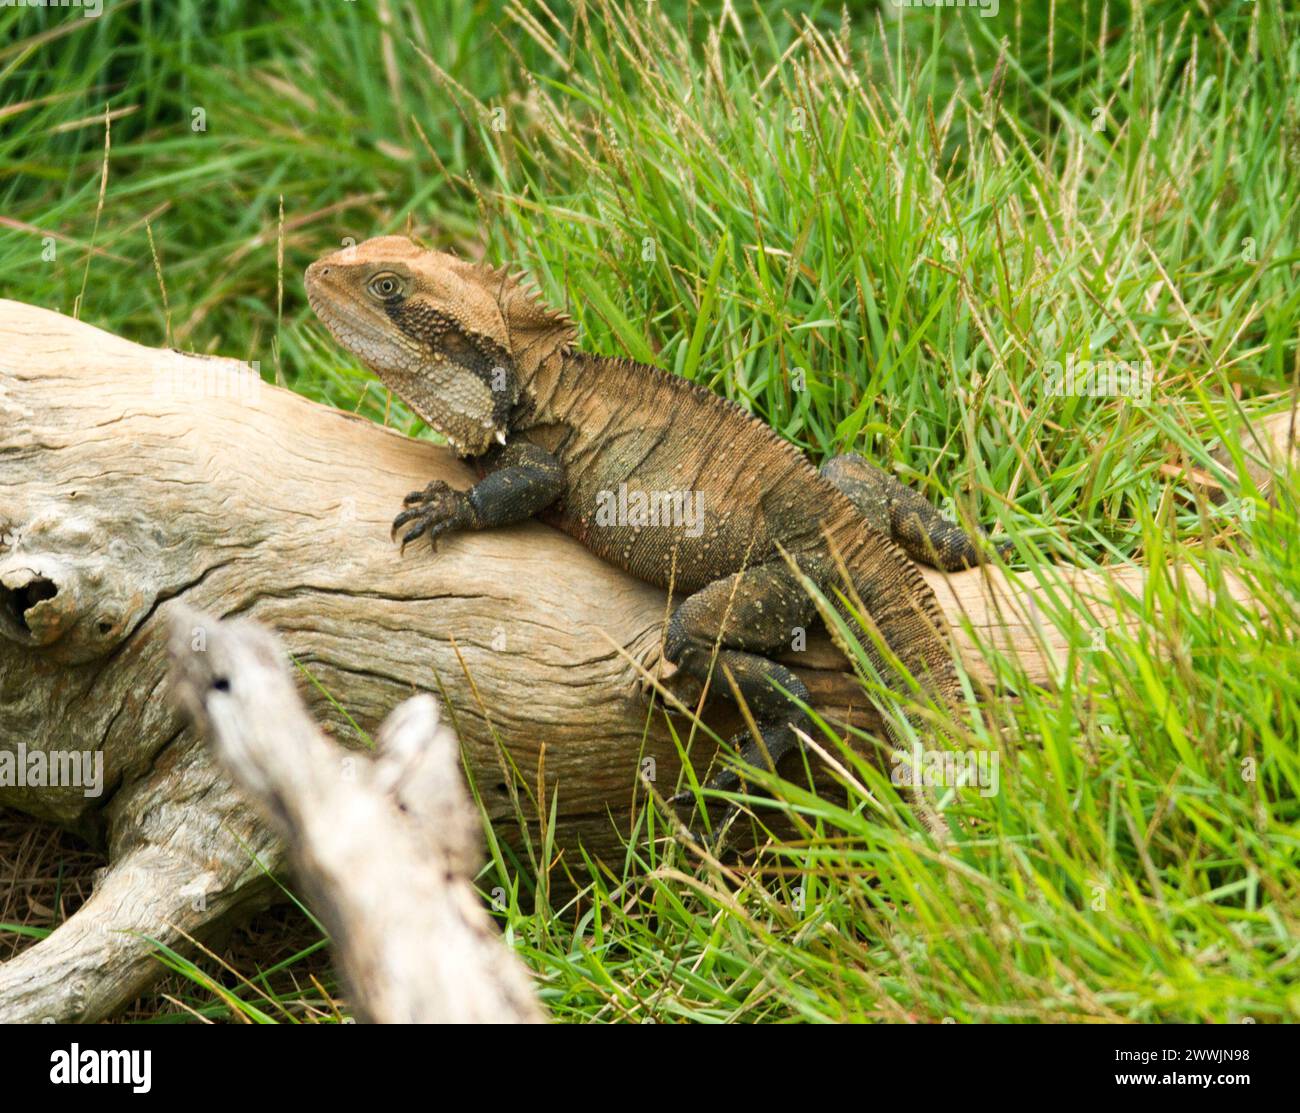 Eastern Water Dragon, Physignathus lesueurii, an Australian lizard, sunbathing on a log hemmed with emerald green grass in an urban park in Queensland. Stock Photo